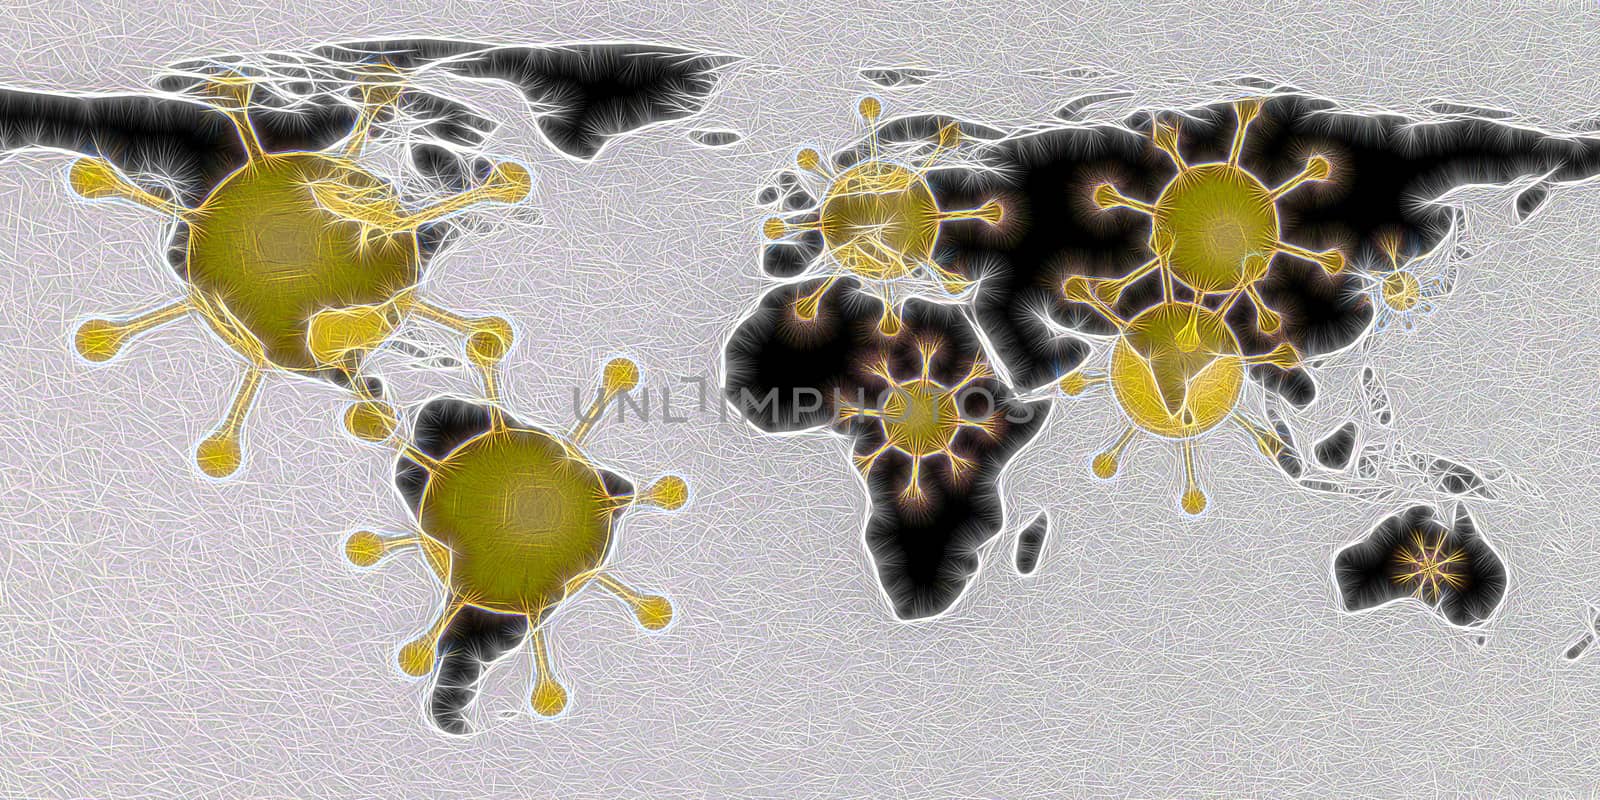 3D-Illustration of a world map showing corona virus hotspots in  by MP_foto71